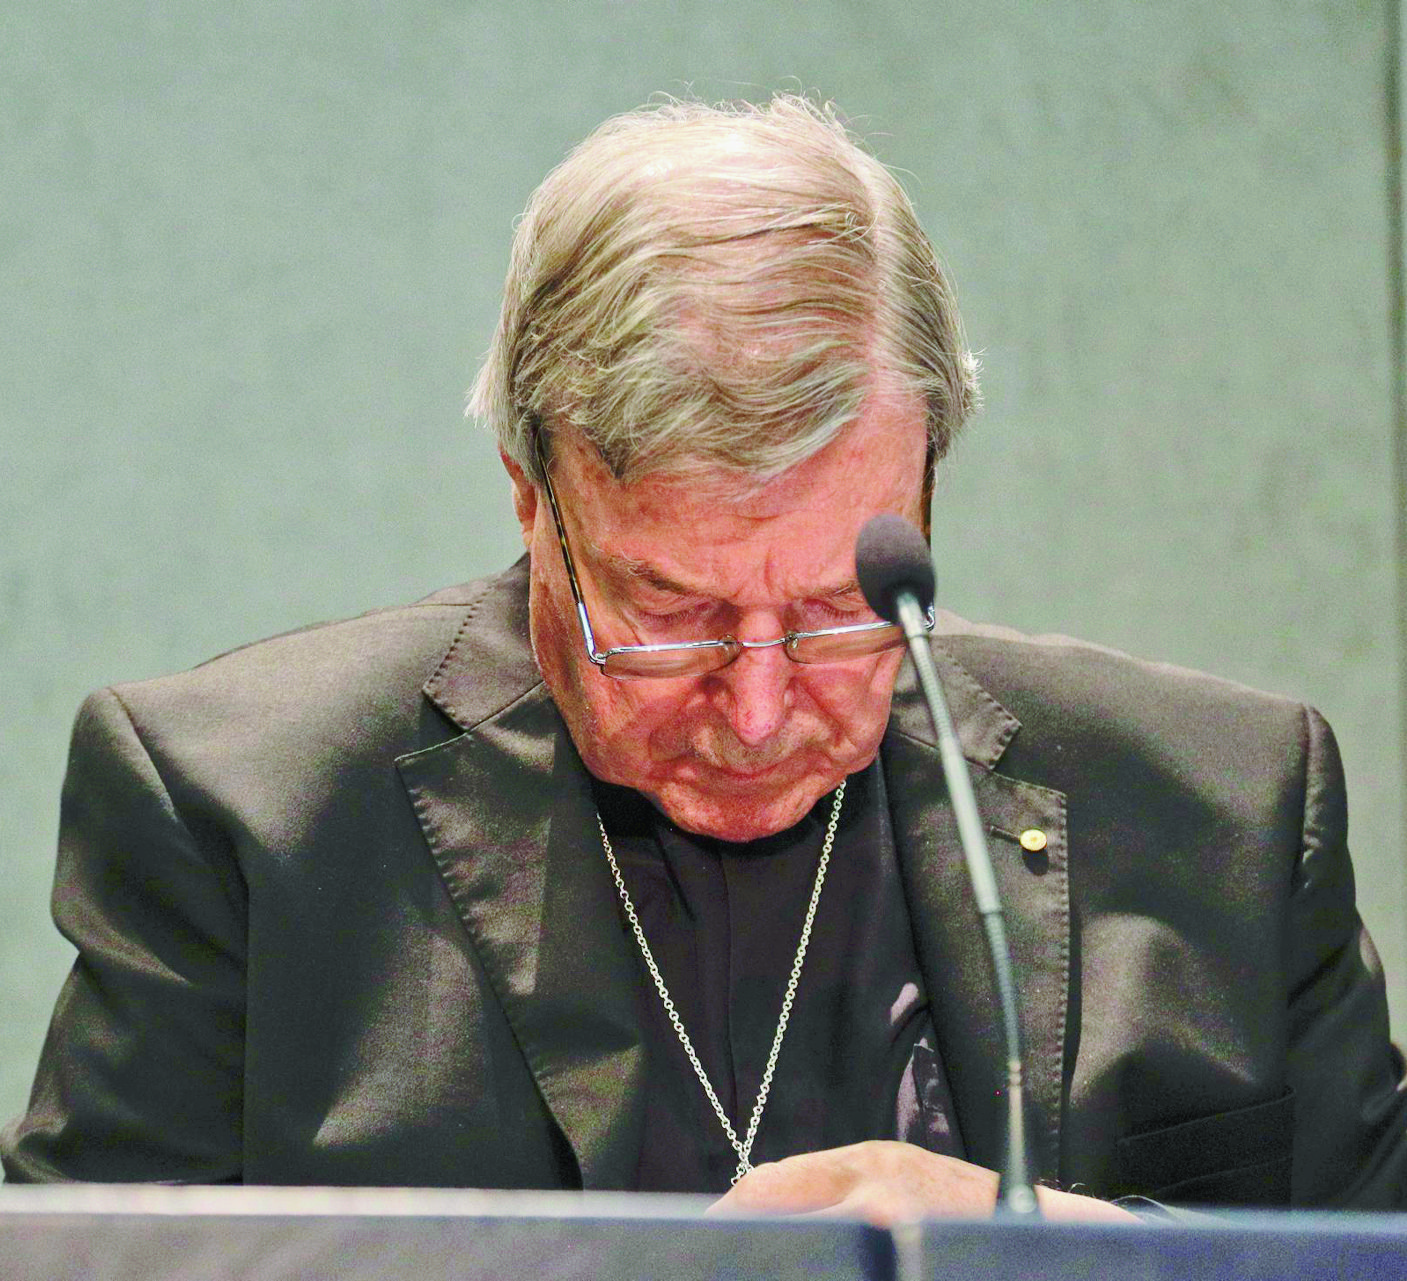 Cardinal George Pell meets the media, at the Vatican, Thursday, June 29, 2017. The Catholic Archdiocese of Sydney says Vatican Cardinal George Pell will return to Australia to fight sexual assault charges as soon as possible. (AP Photo/Gregorio Borgia) APTOPIX Vatican Pell